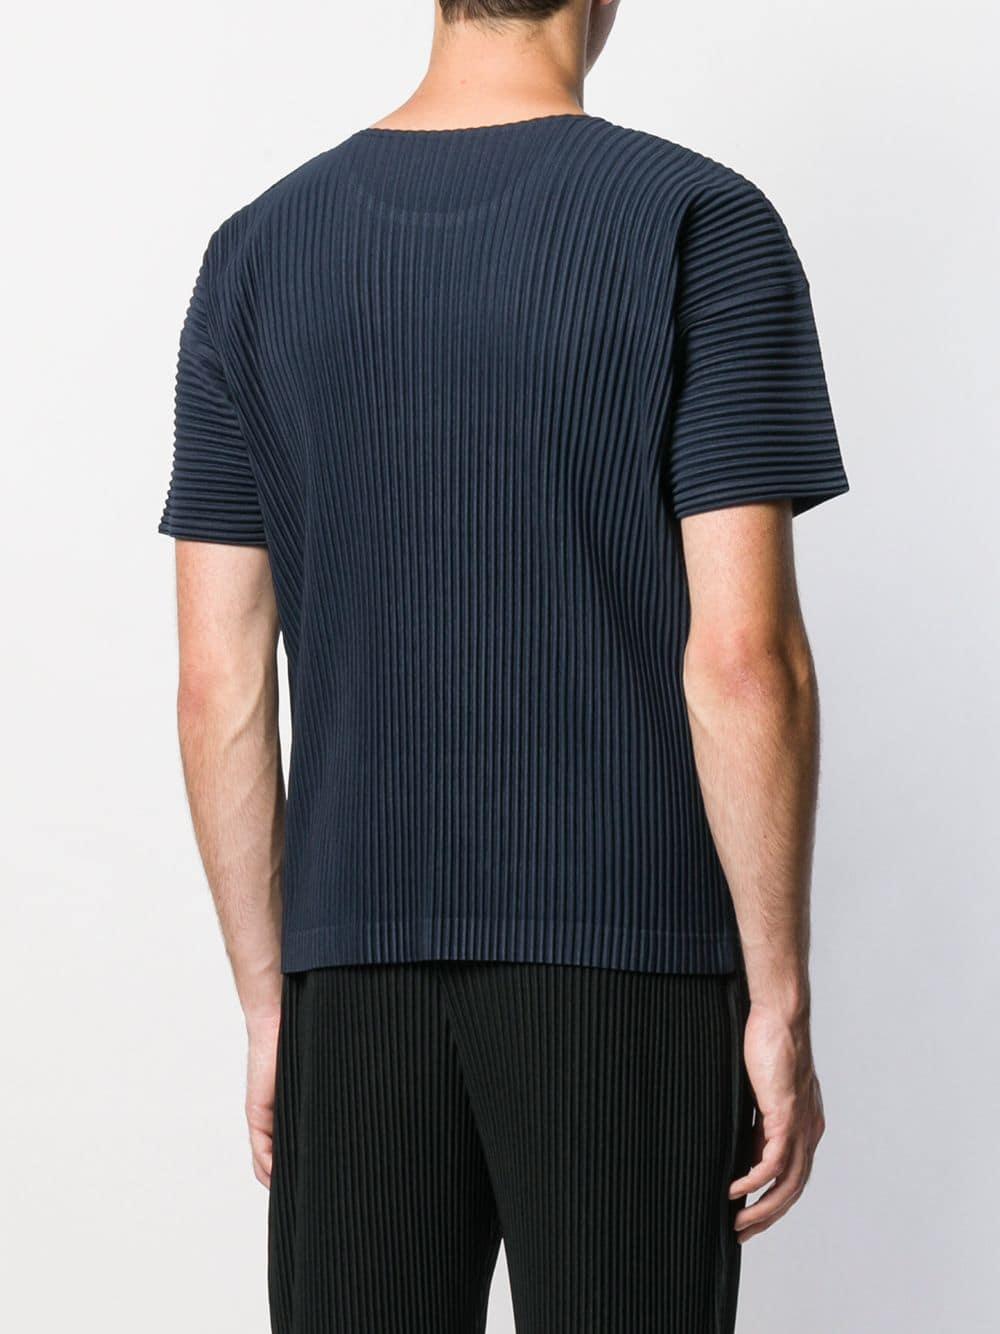 Homme Plissé Issey Miyake Pleated T-shirt in Blue for Men - Lyst